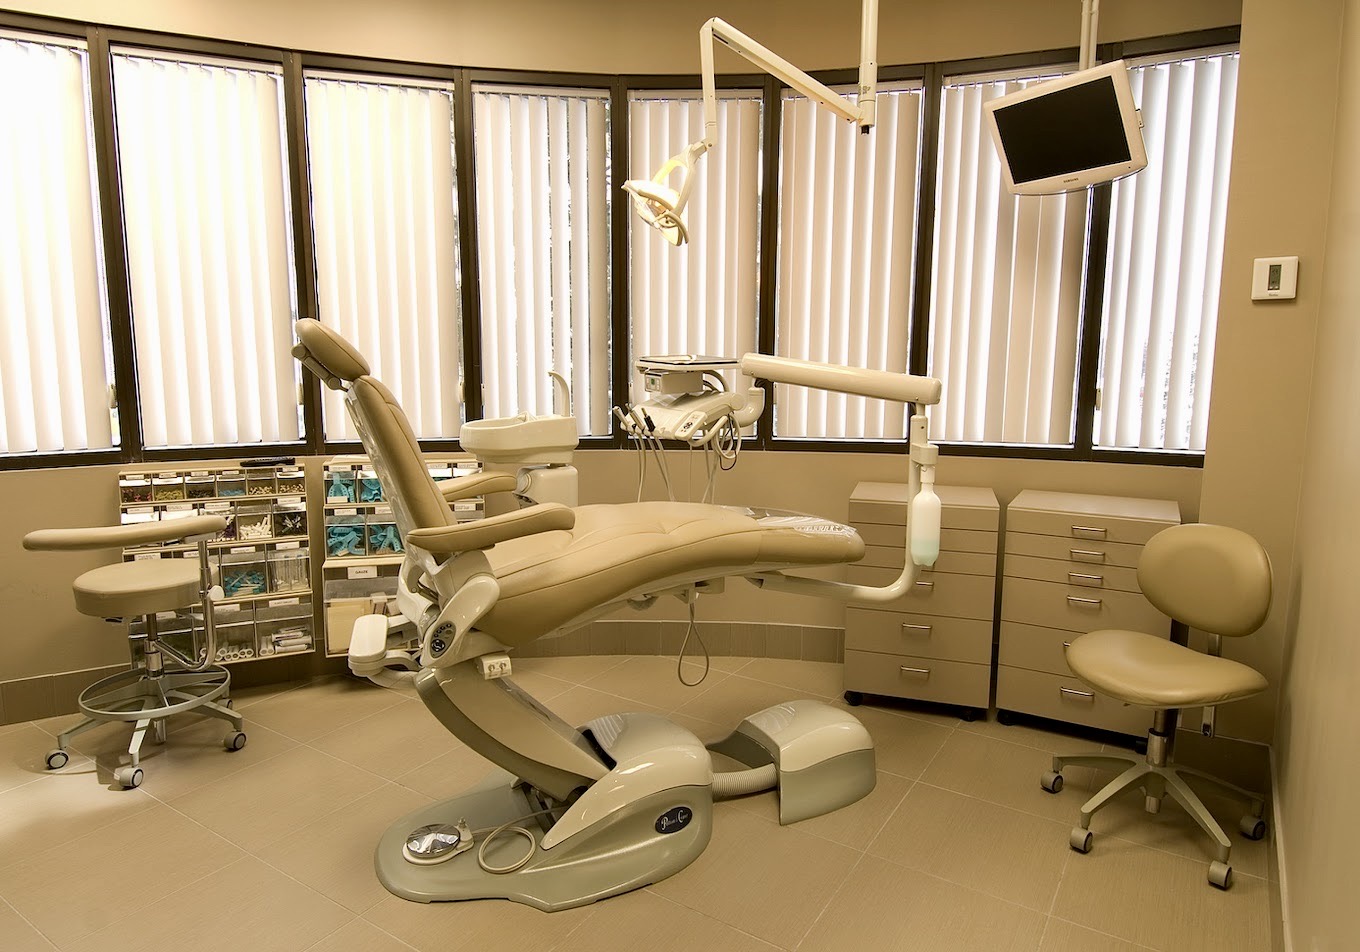 Dental office typical operatory room